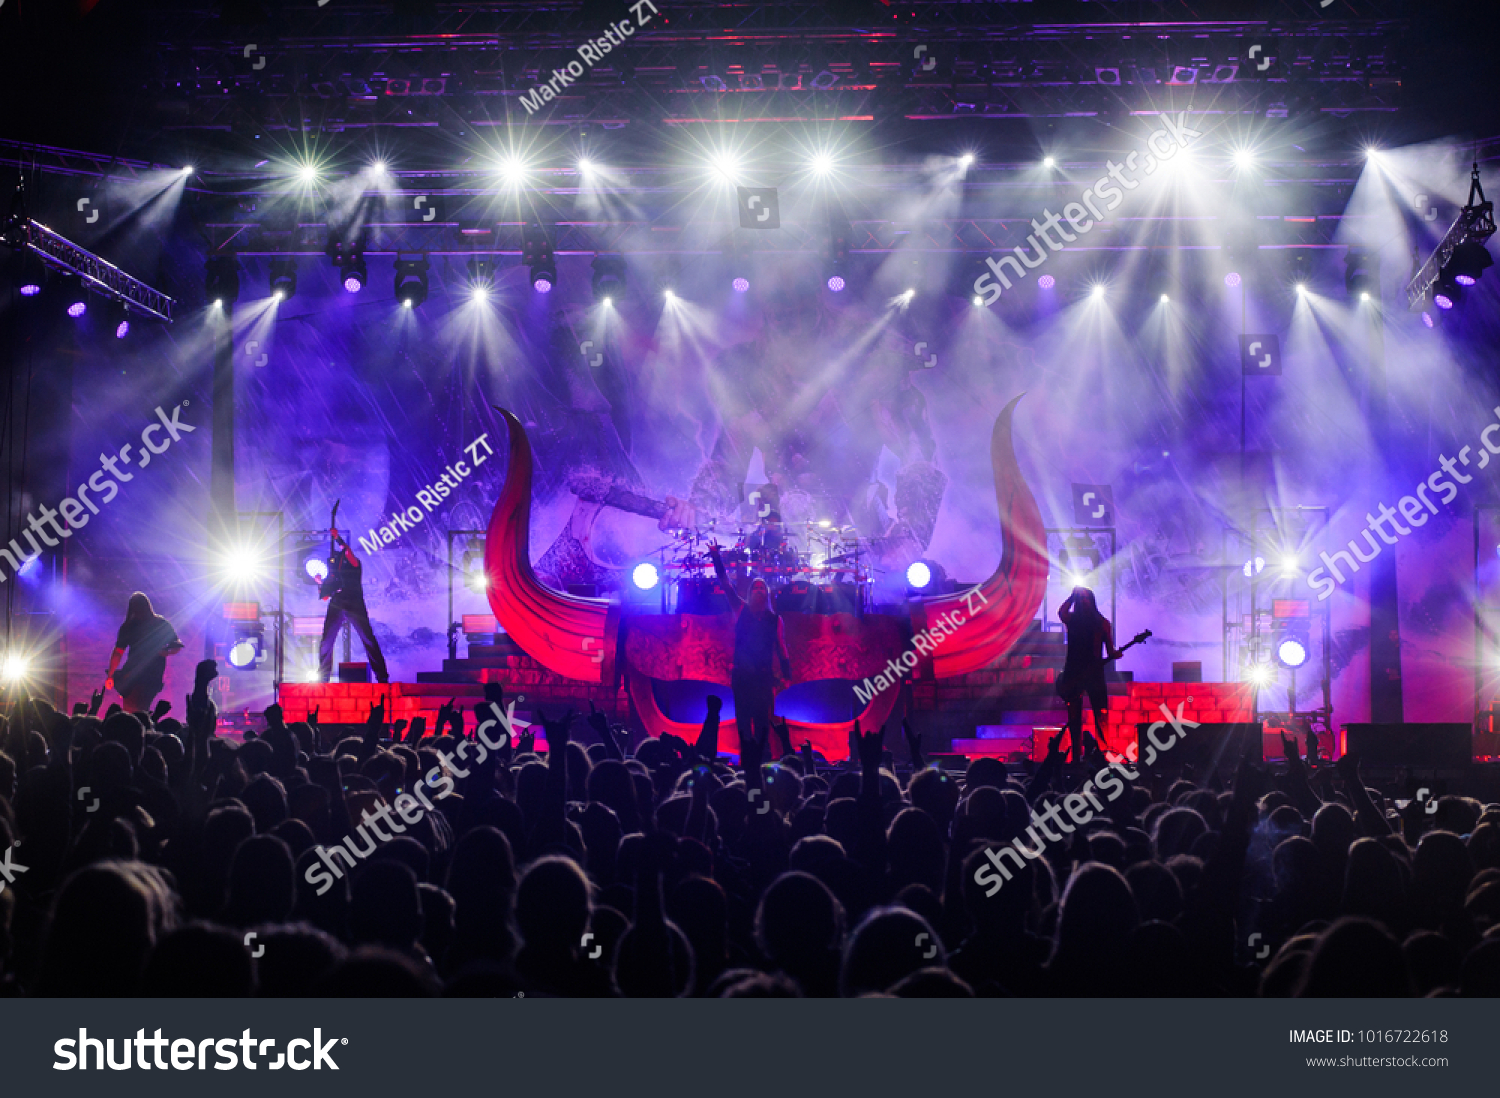 Viking metal band Amon Amarth performing at Metaldays Festival on July 25th, 2017 in Tolmin, Slovenia #1016722618